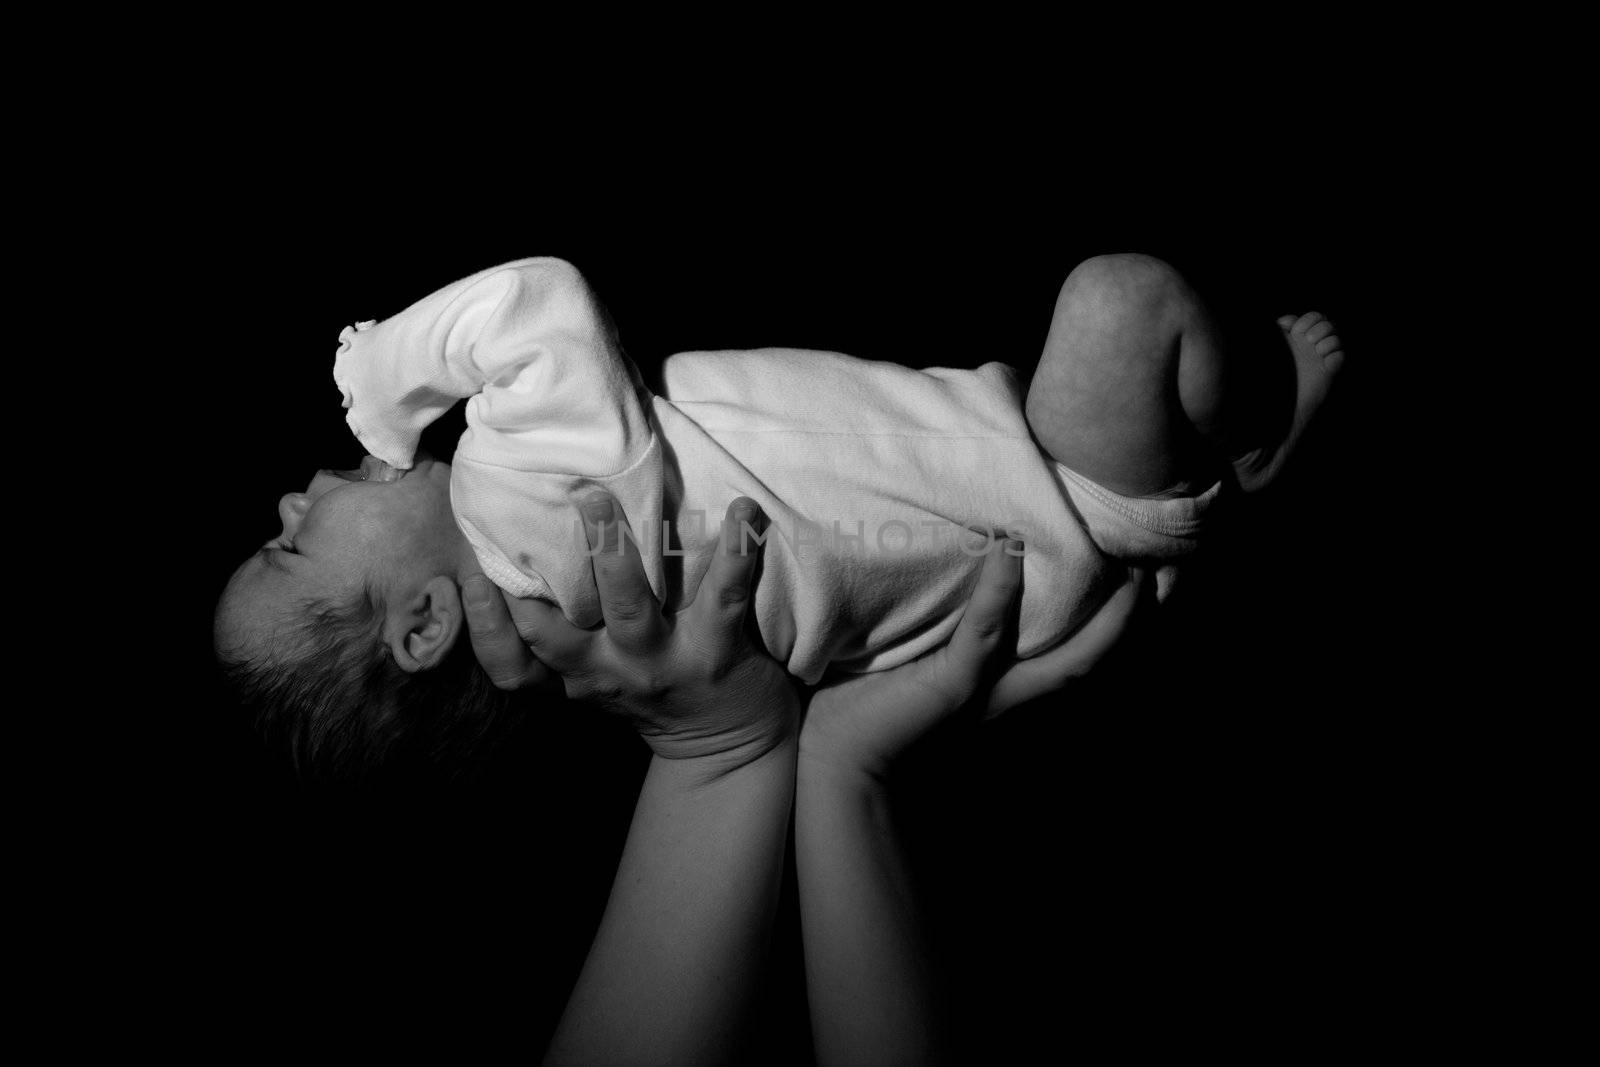 A baby being held in the air.  The child is risen above.  Image in black and white.